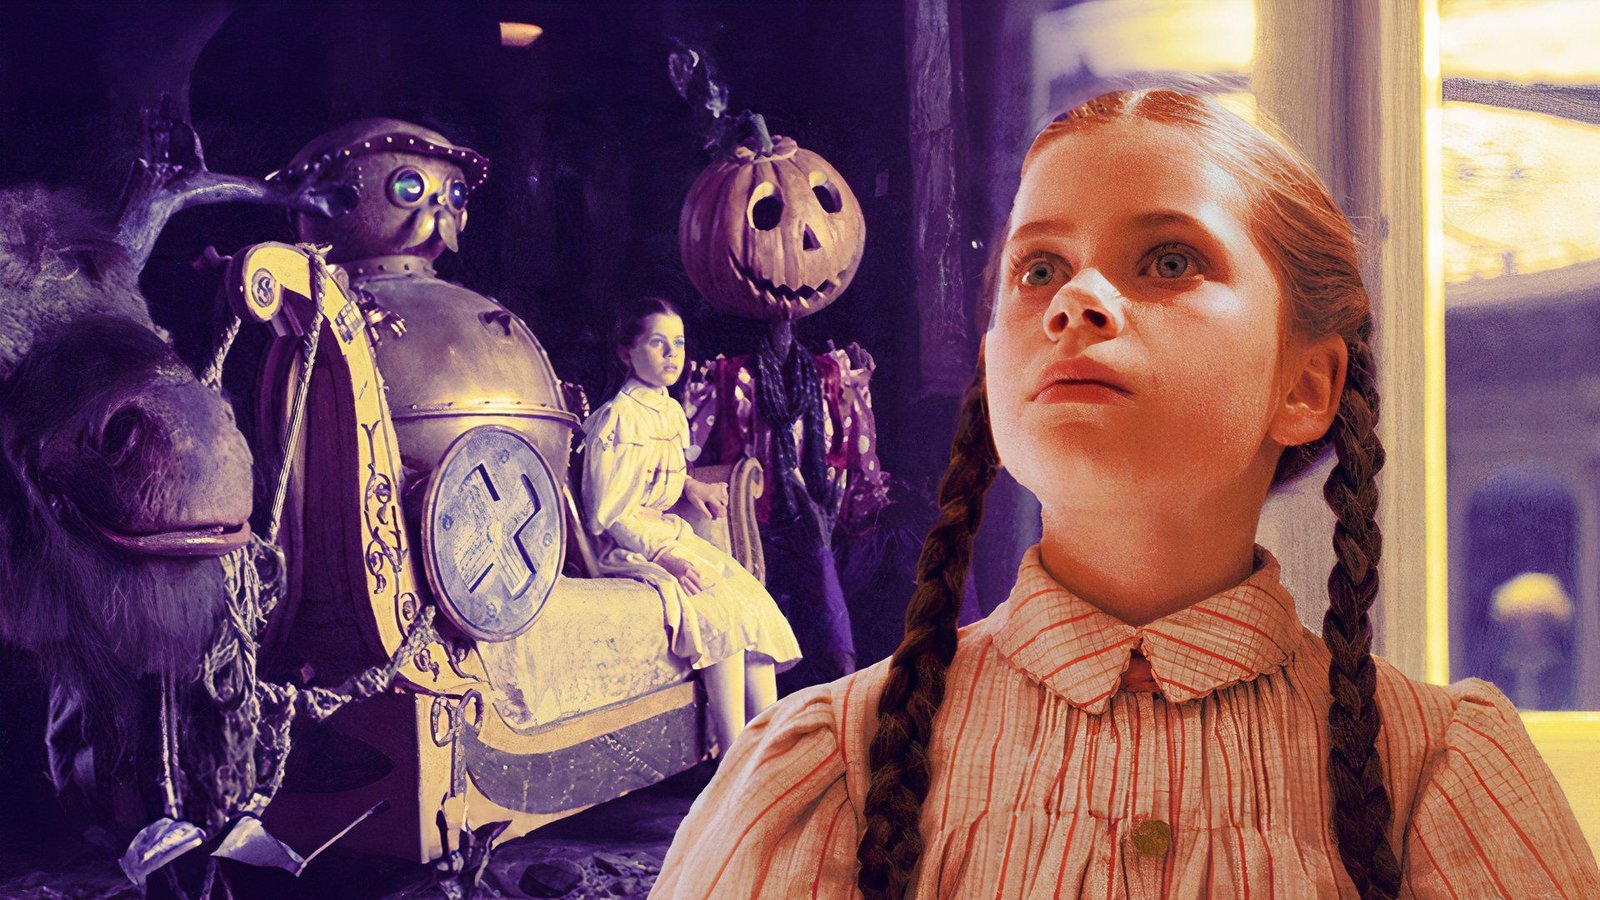 The Most Faithful Wizard of Oz Adaptation Was a Massive Flop